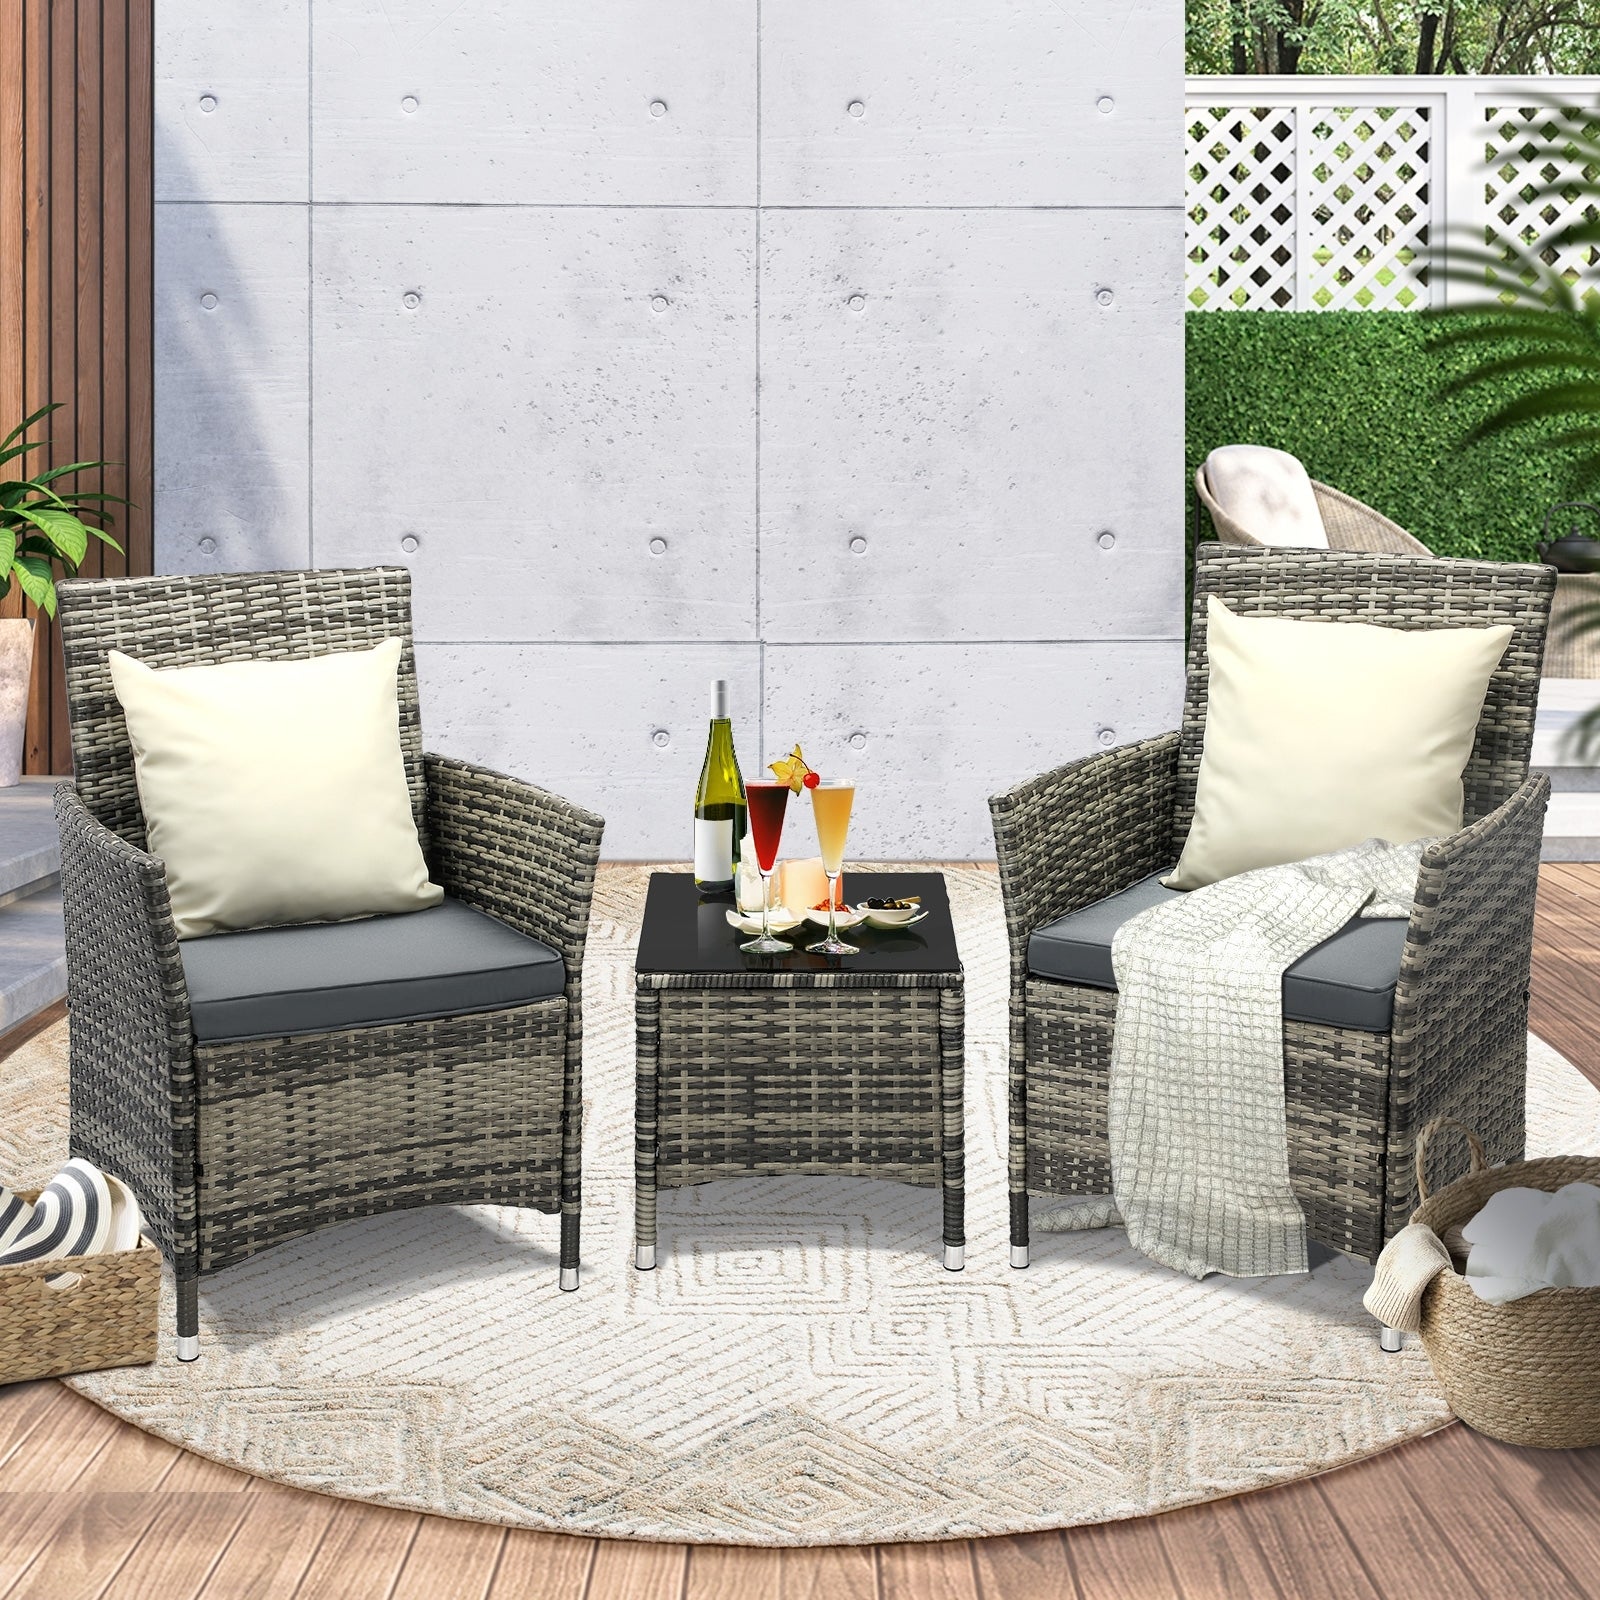 Livsip Outdoor Furniture Set 3 Piece Wicker Outdoor Chair and Table Garden Furniture Setting